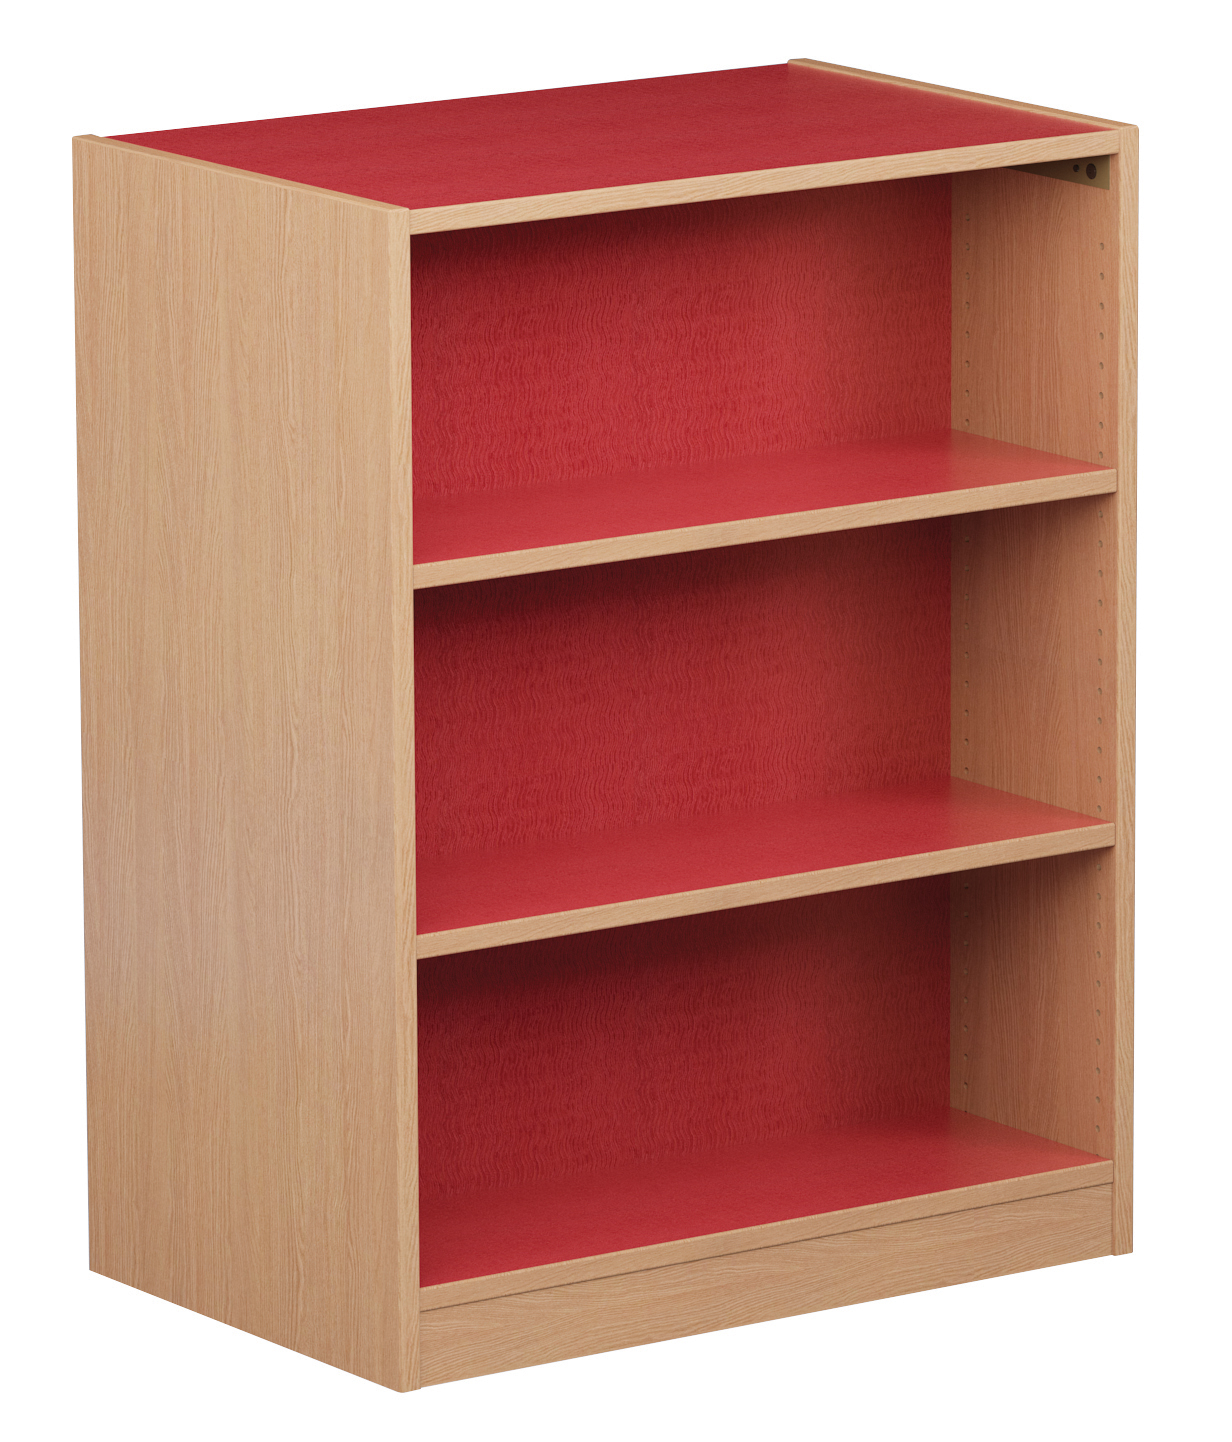 DOUBLE FACE STRAIGHT SHELVING